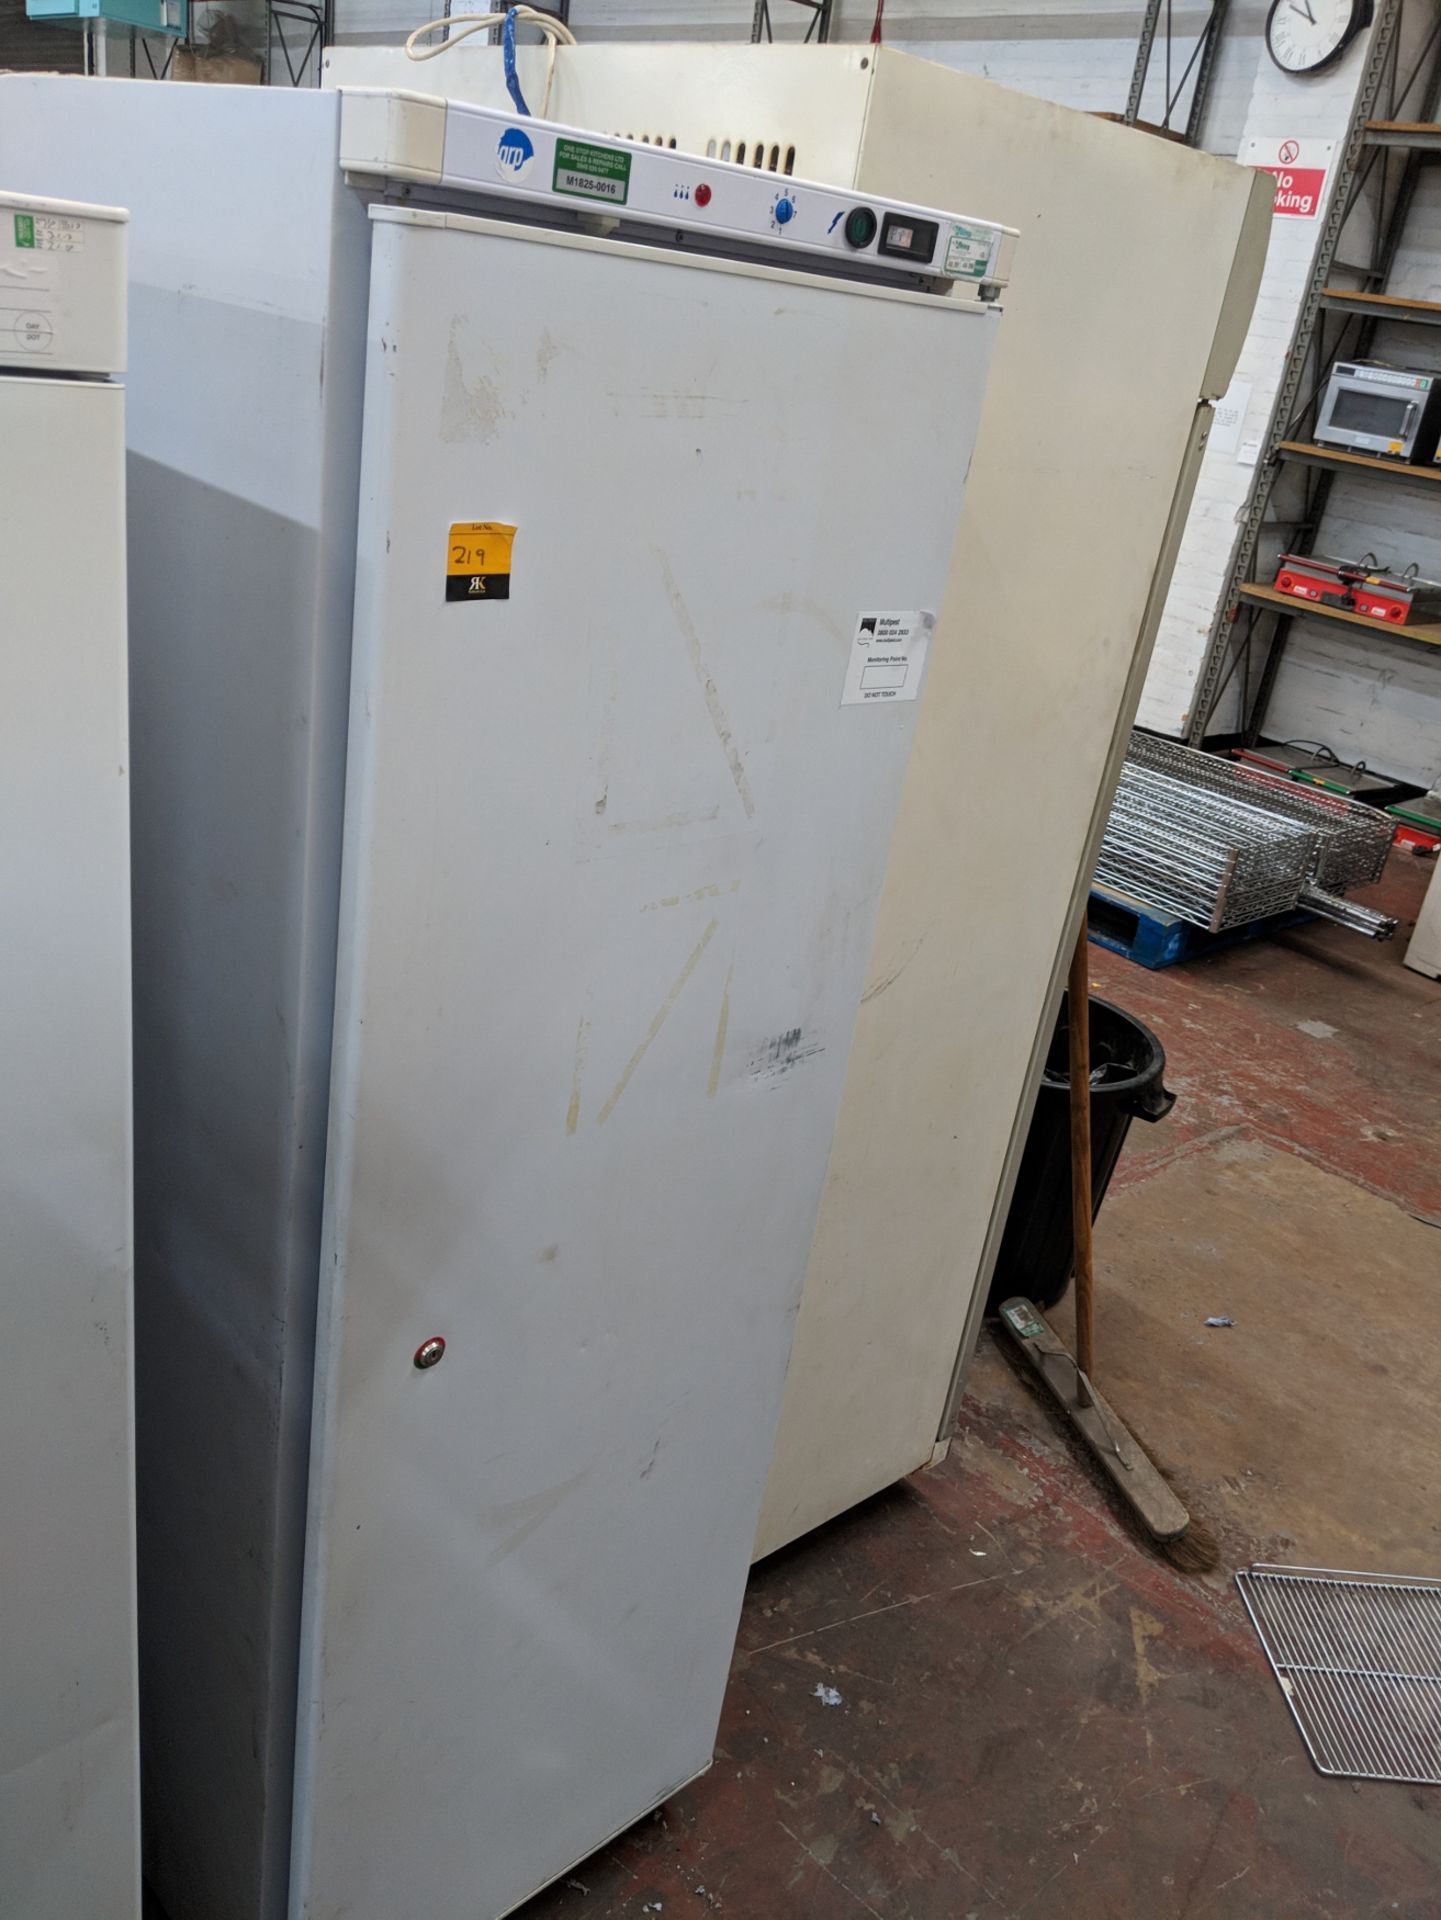 Iarp tall white fridge, model AB400PV IMPORTANT: Please remember goods successfully bid upon must be